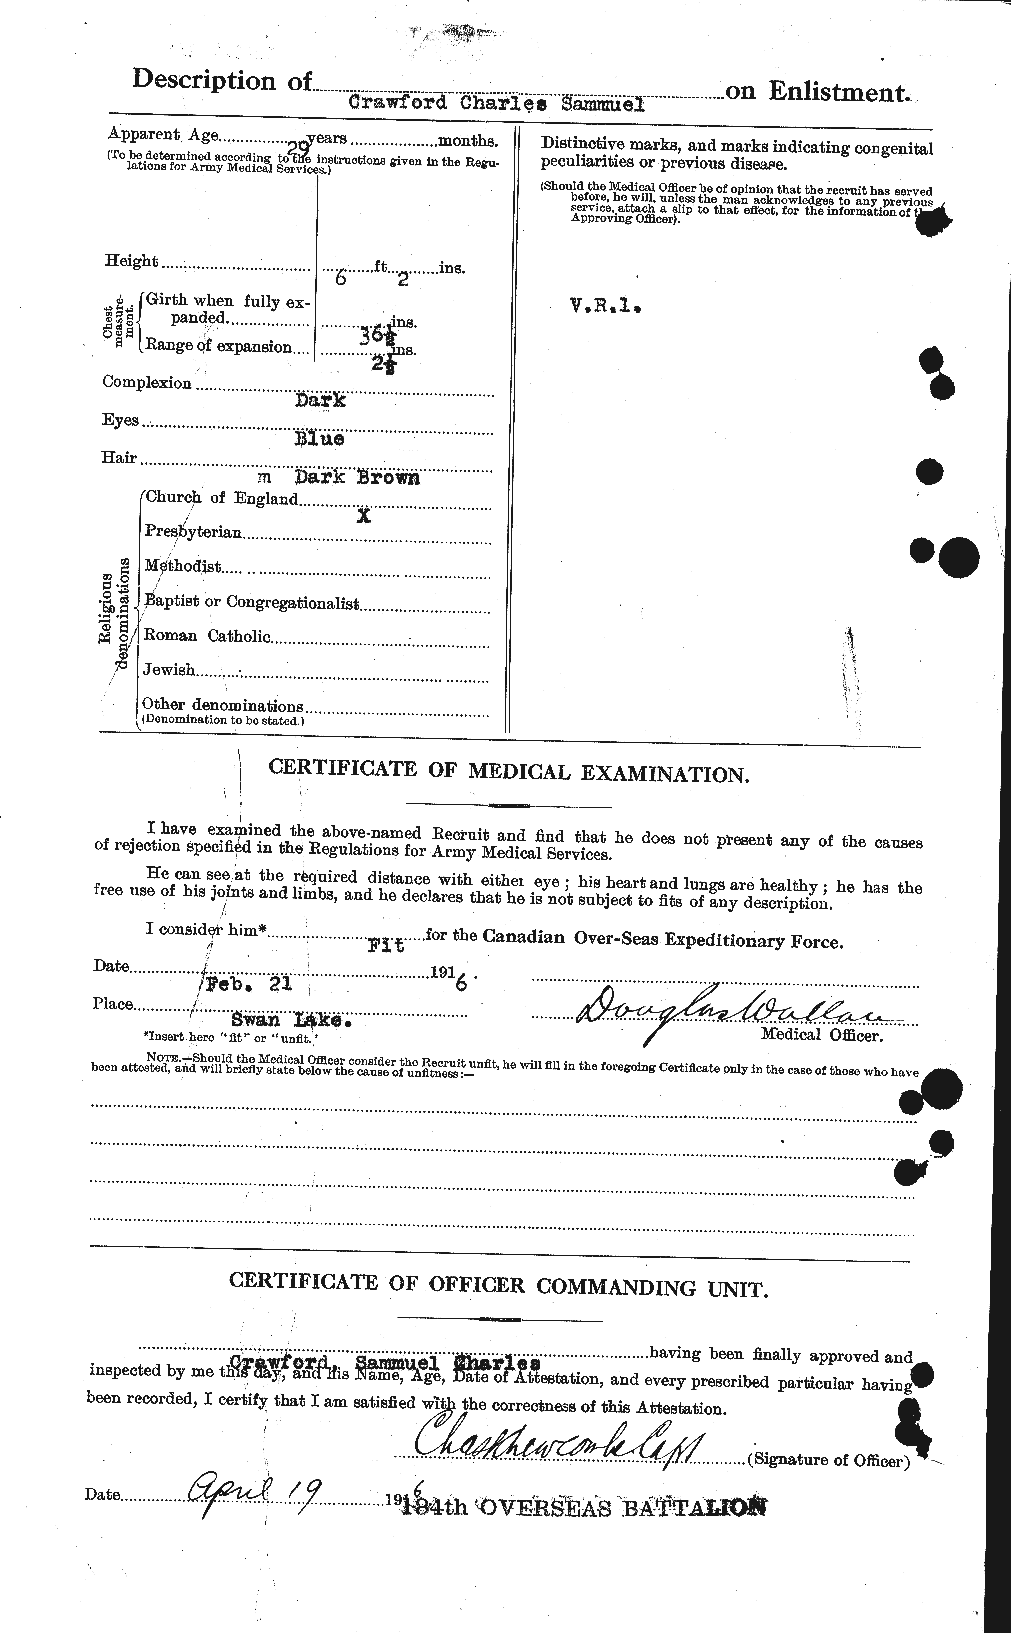 Personnel Records of the First World War - CEF 061376b